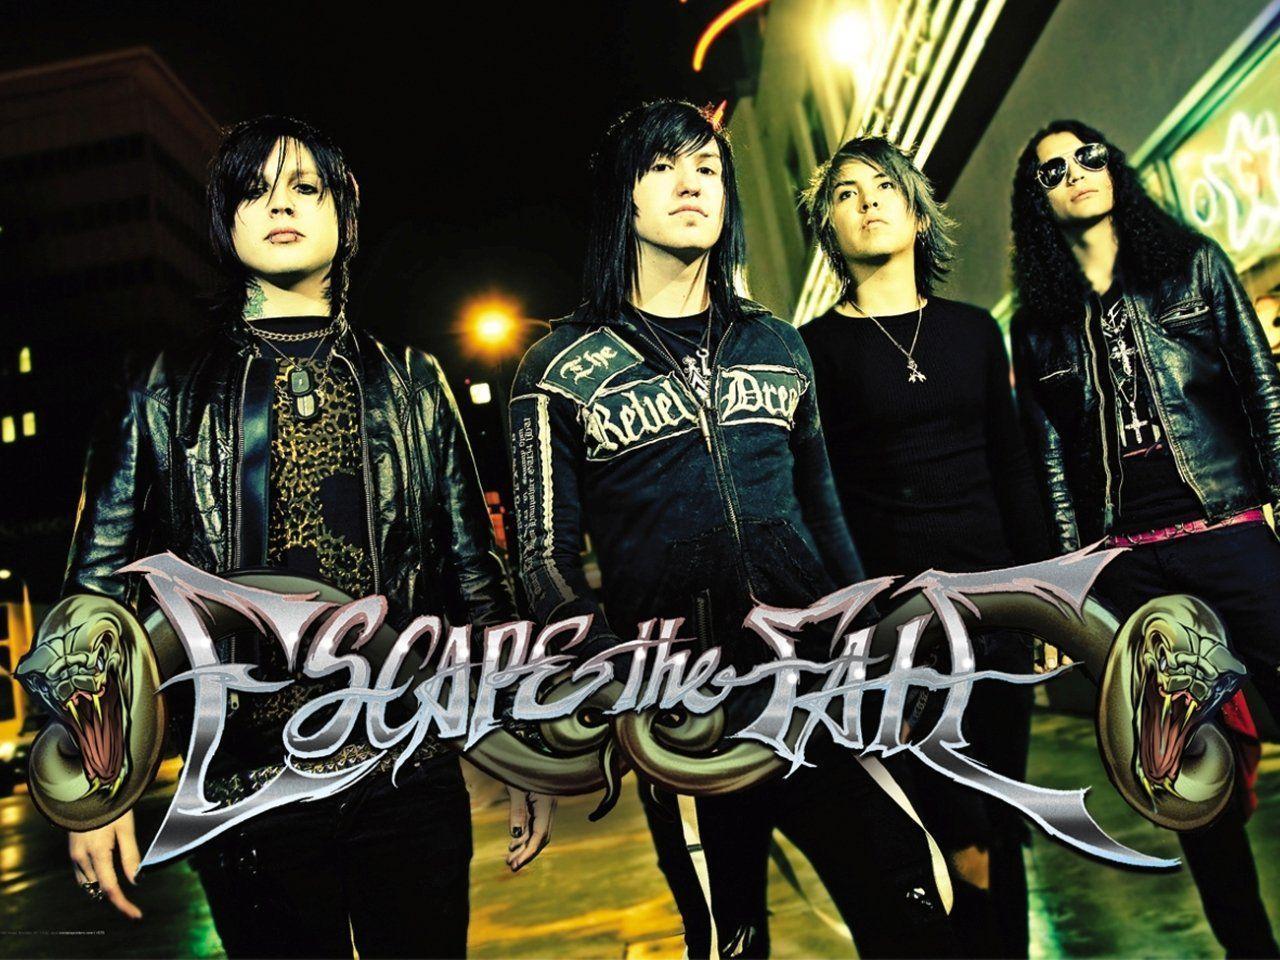 Free Escape The Fate 005 Cell Phone Wallpaper